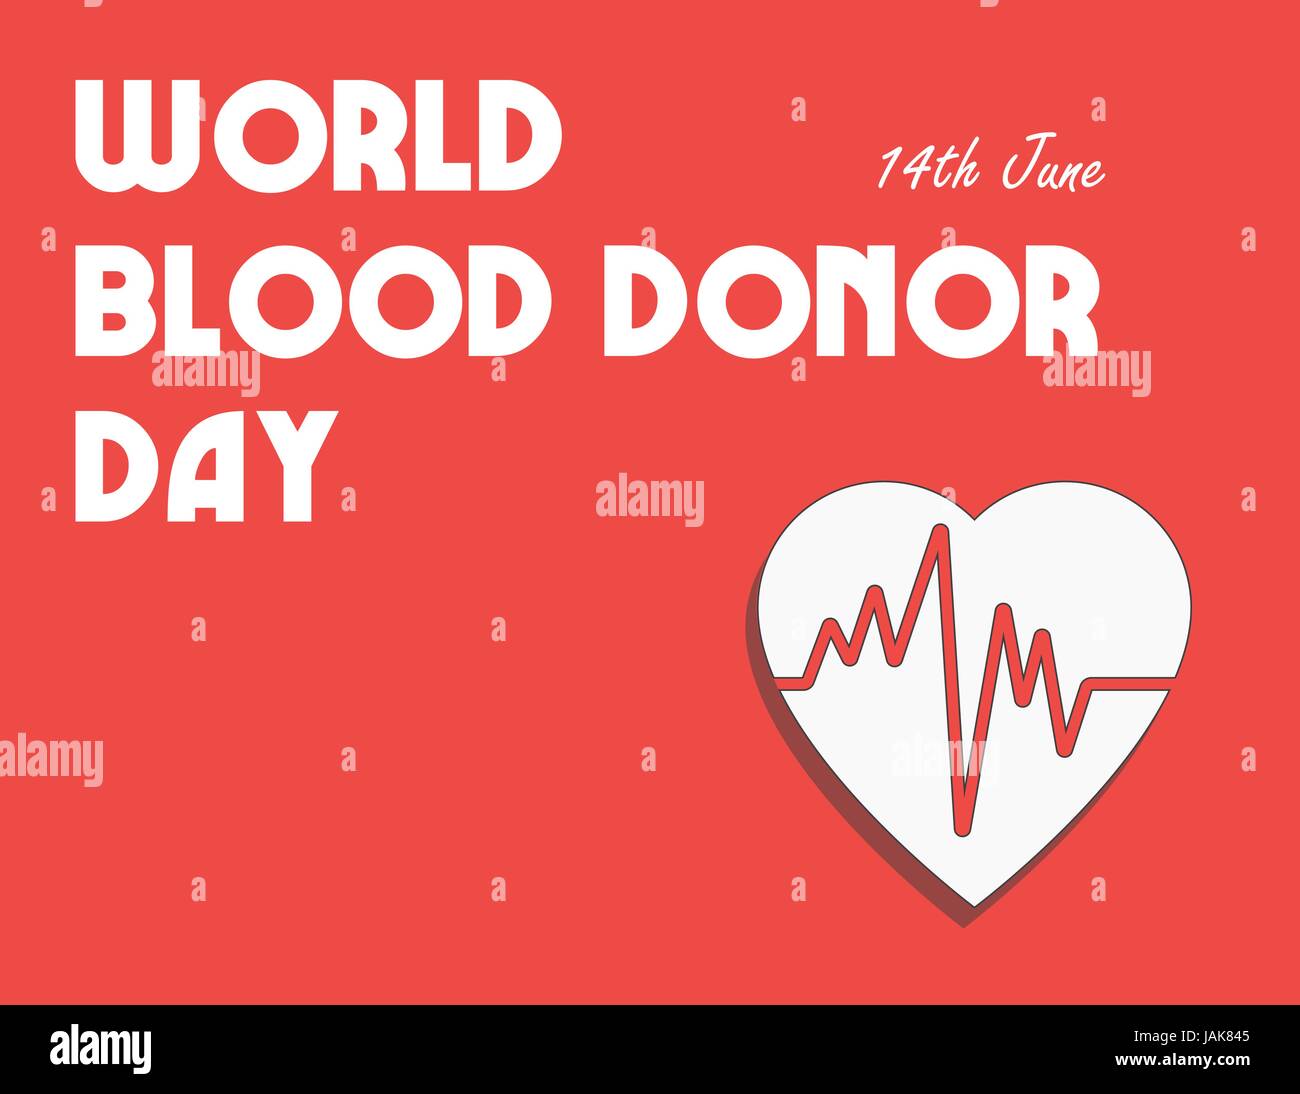 World blood donor day. International holiday. donate blood and save life. Donation give love. Vector ullustration. Heart with heartbeat Stock Vector